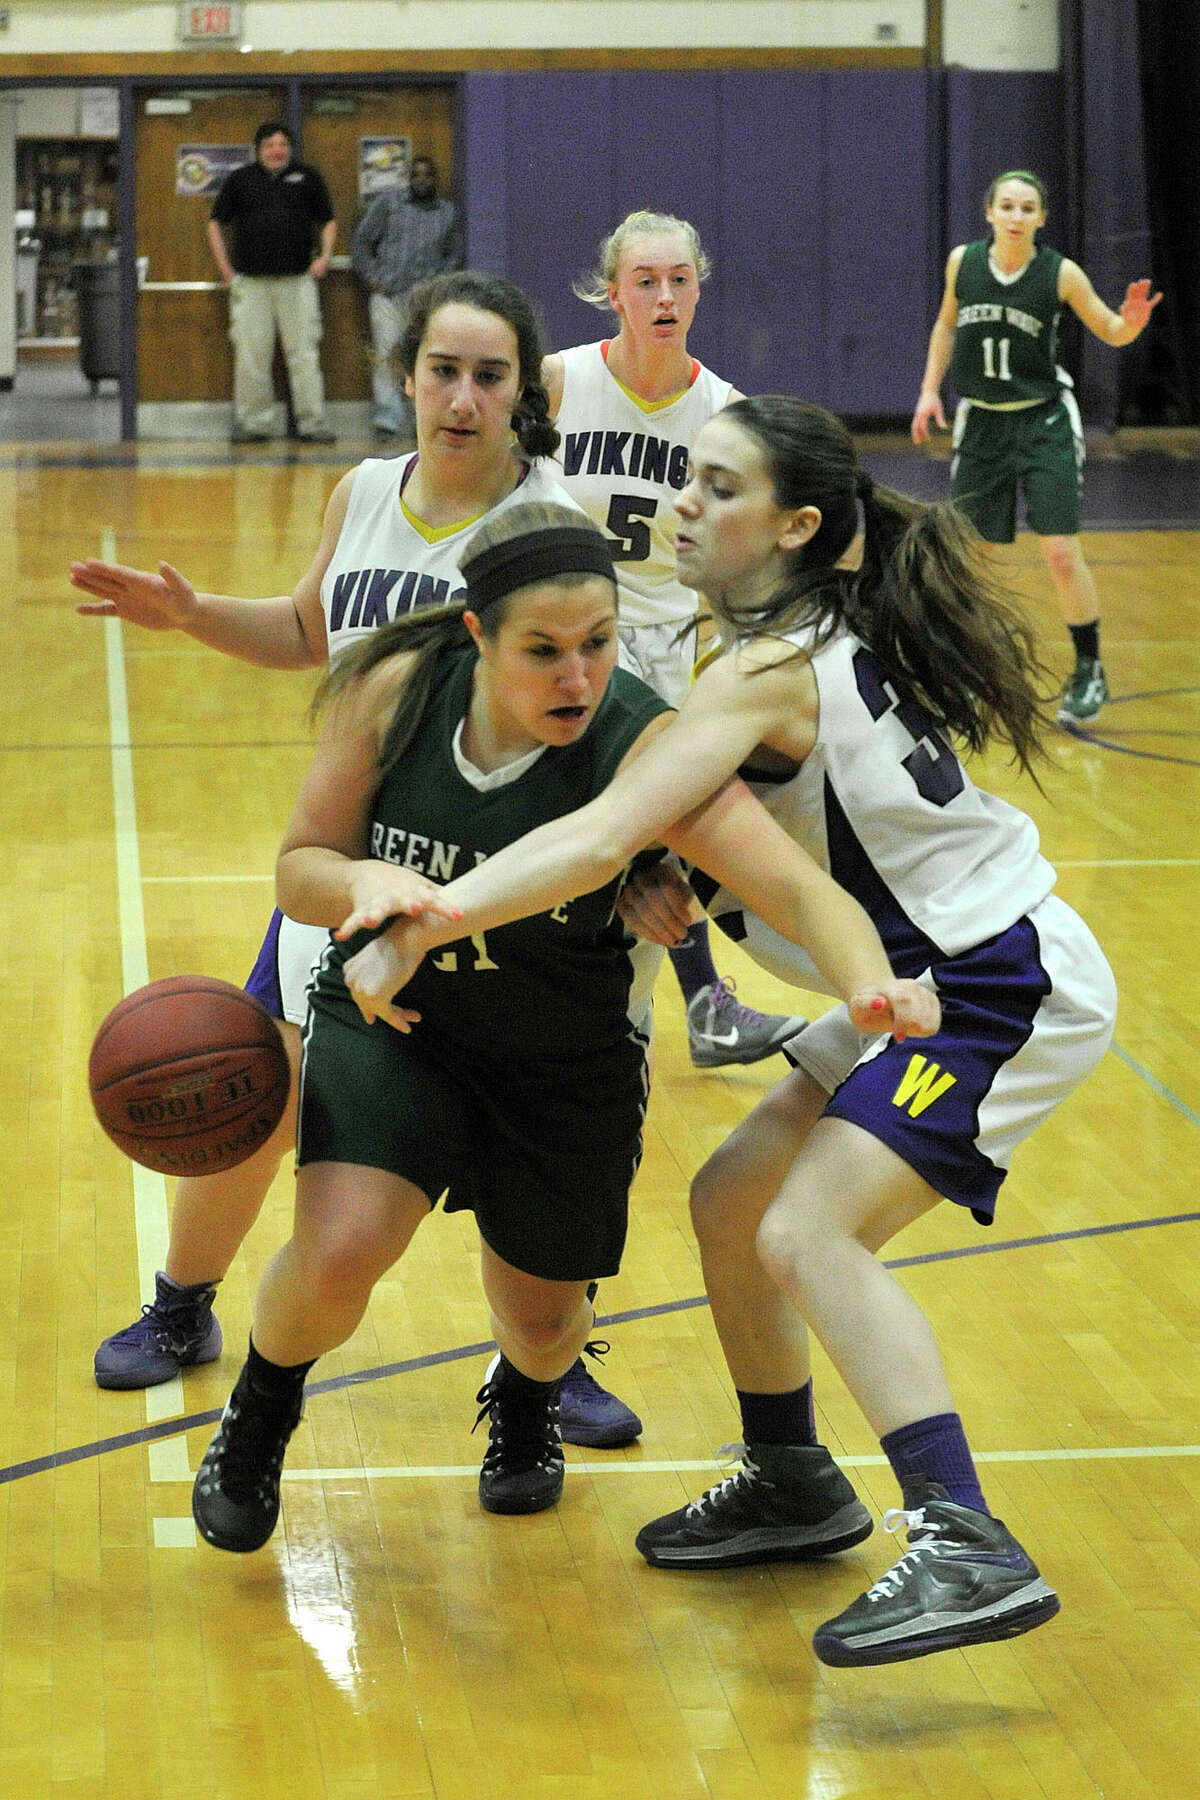 Westhill's Elizabeth Grosso smacks the ball from the hands of Lindsey Heaton, of New Milford, during their Class LL basketball game at Westhill High School in Stamford, Conn., on Monday, March 3, 2014. Westhill won, 40-30.